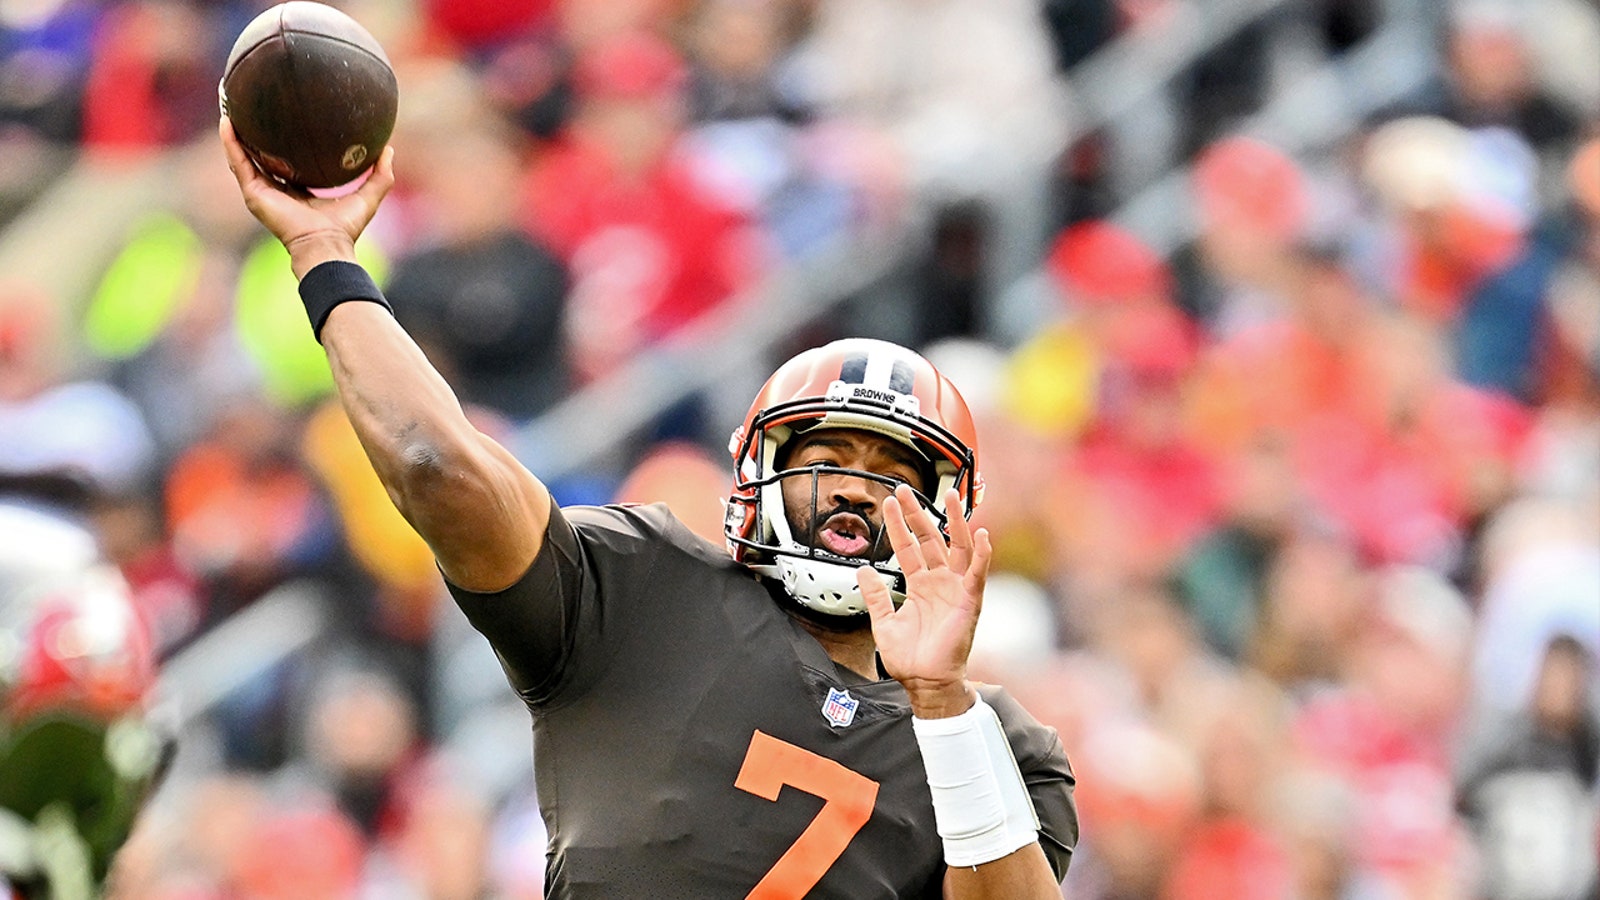 Jacoby Brissett led the Browns to a comeback 23-17 OT win